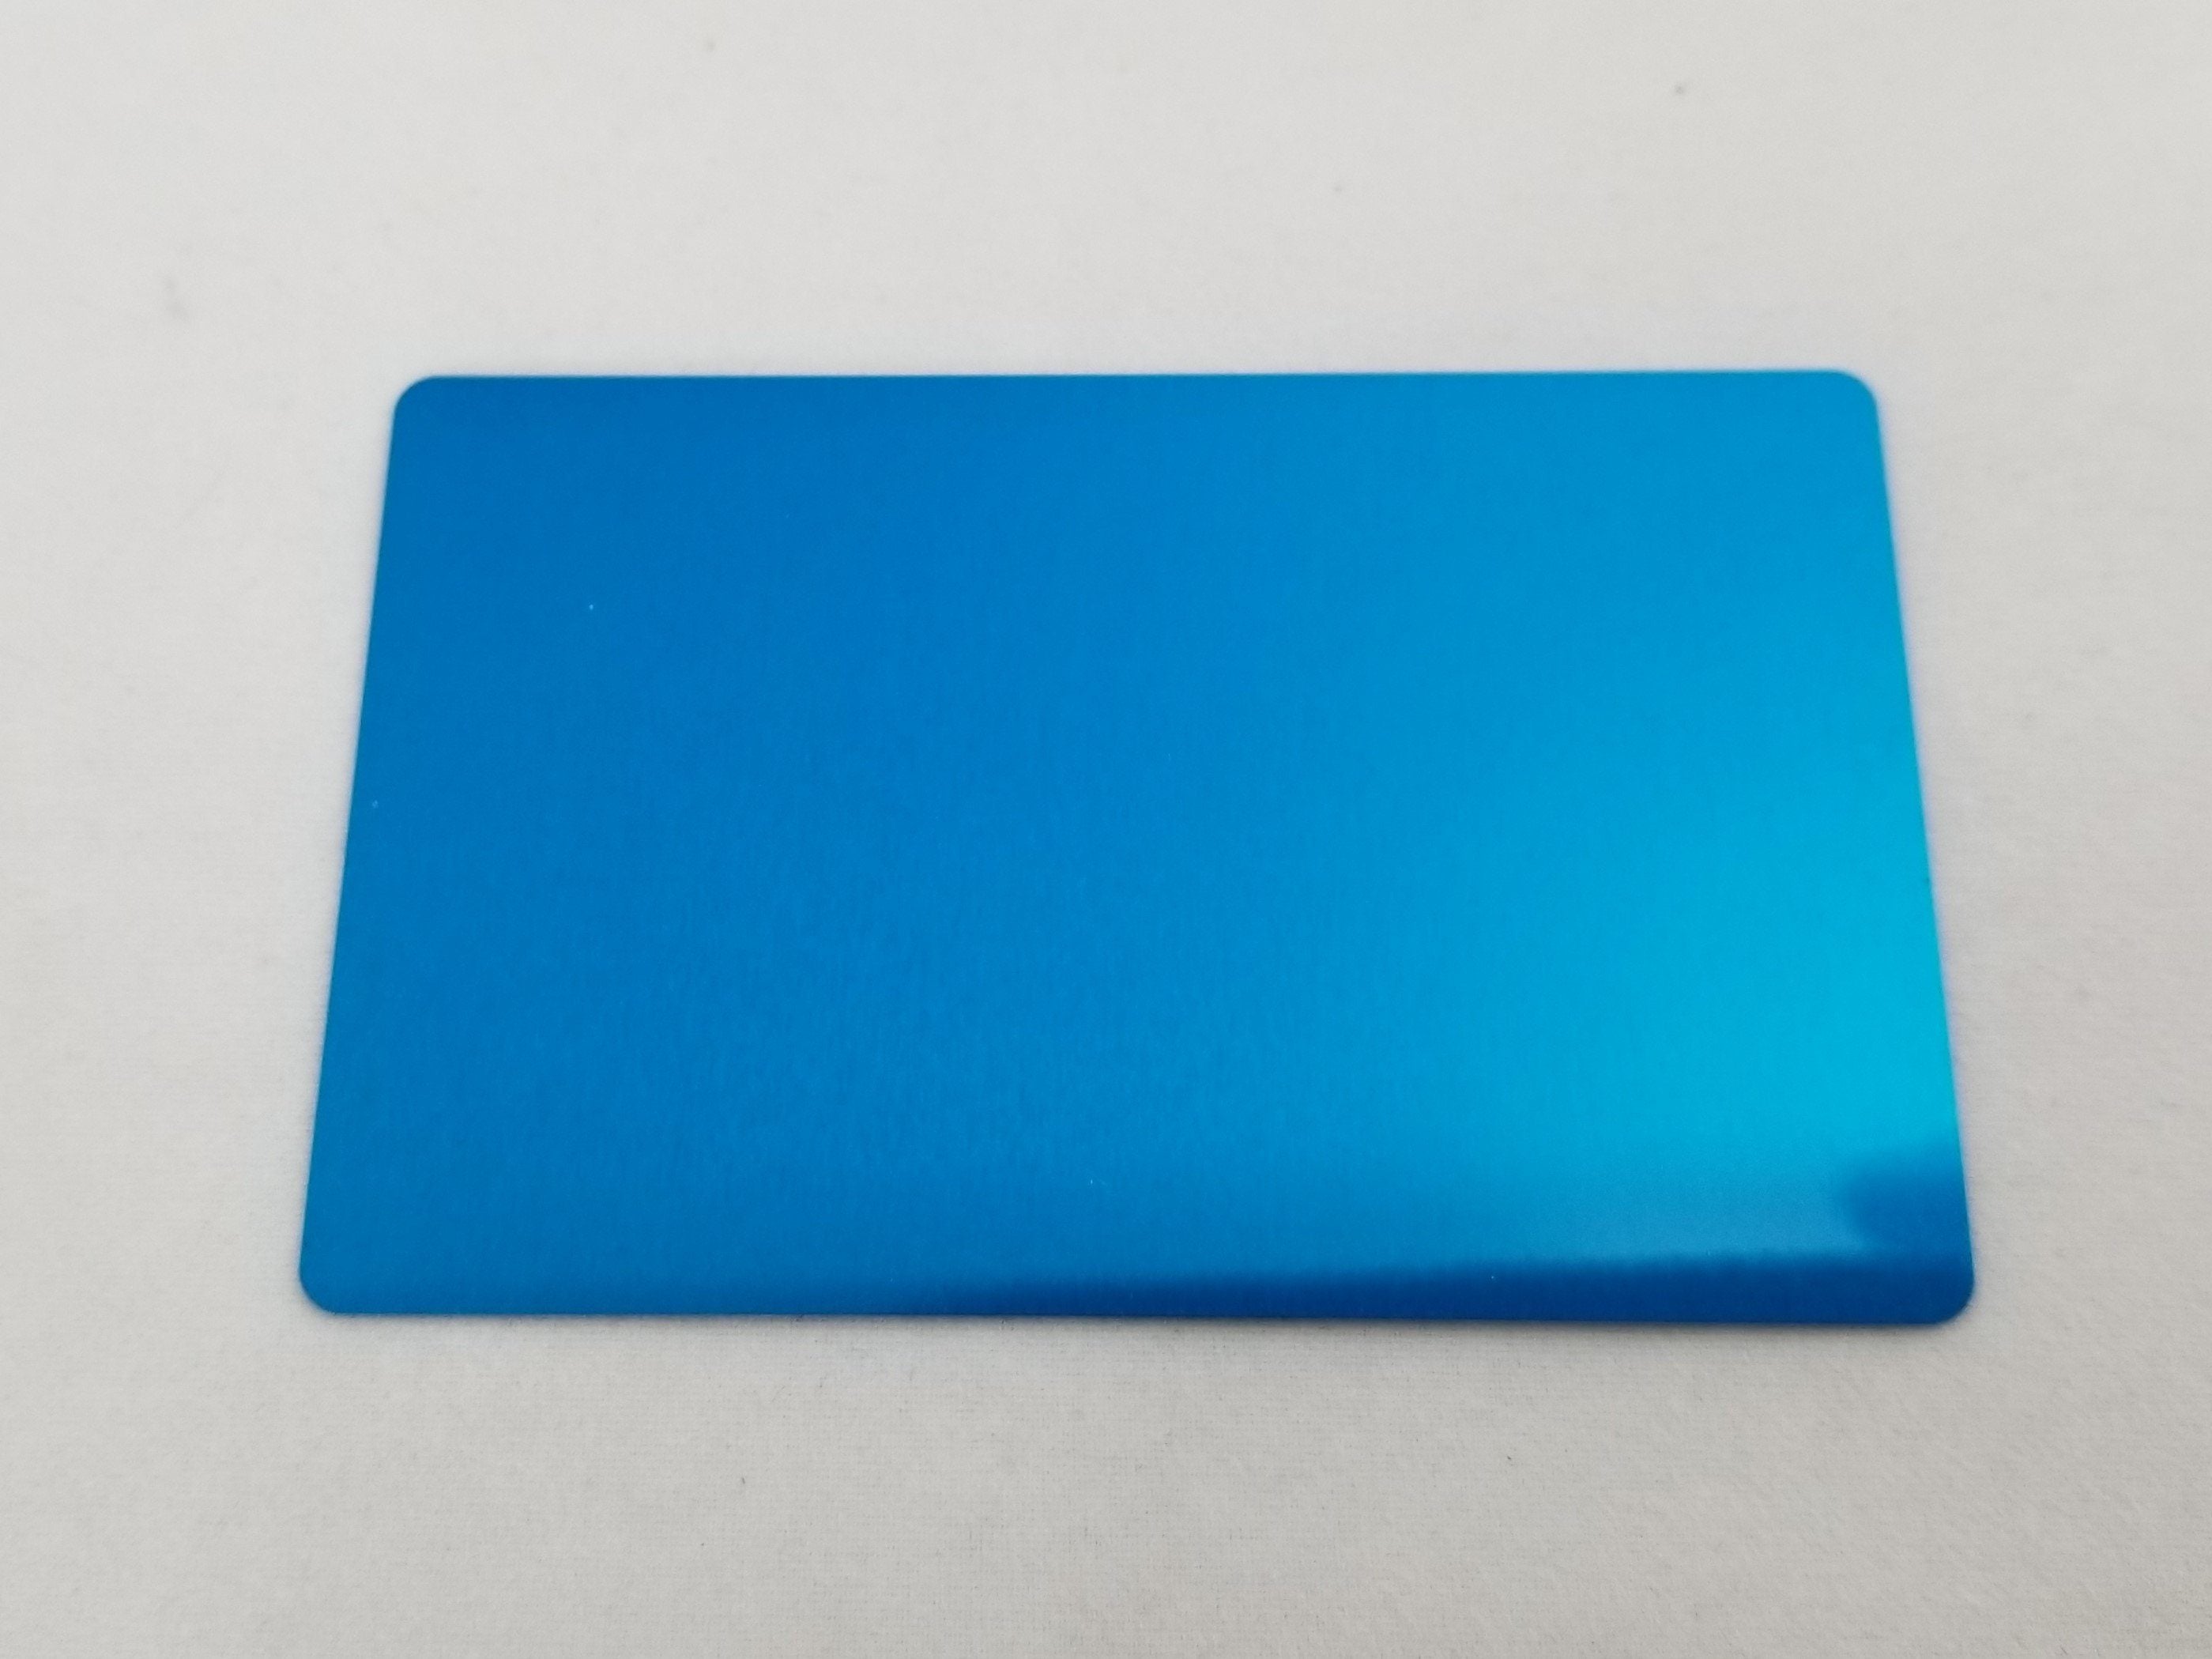 0.45mm Customizable Laser Engraved Anodized Aluminum Business Cards, Personalized Metal Business Cards - Craftworks NW, LLC